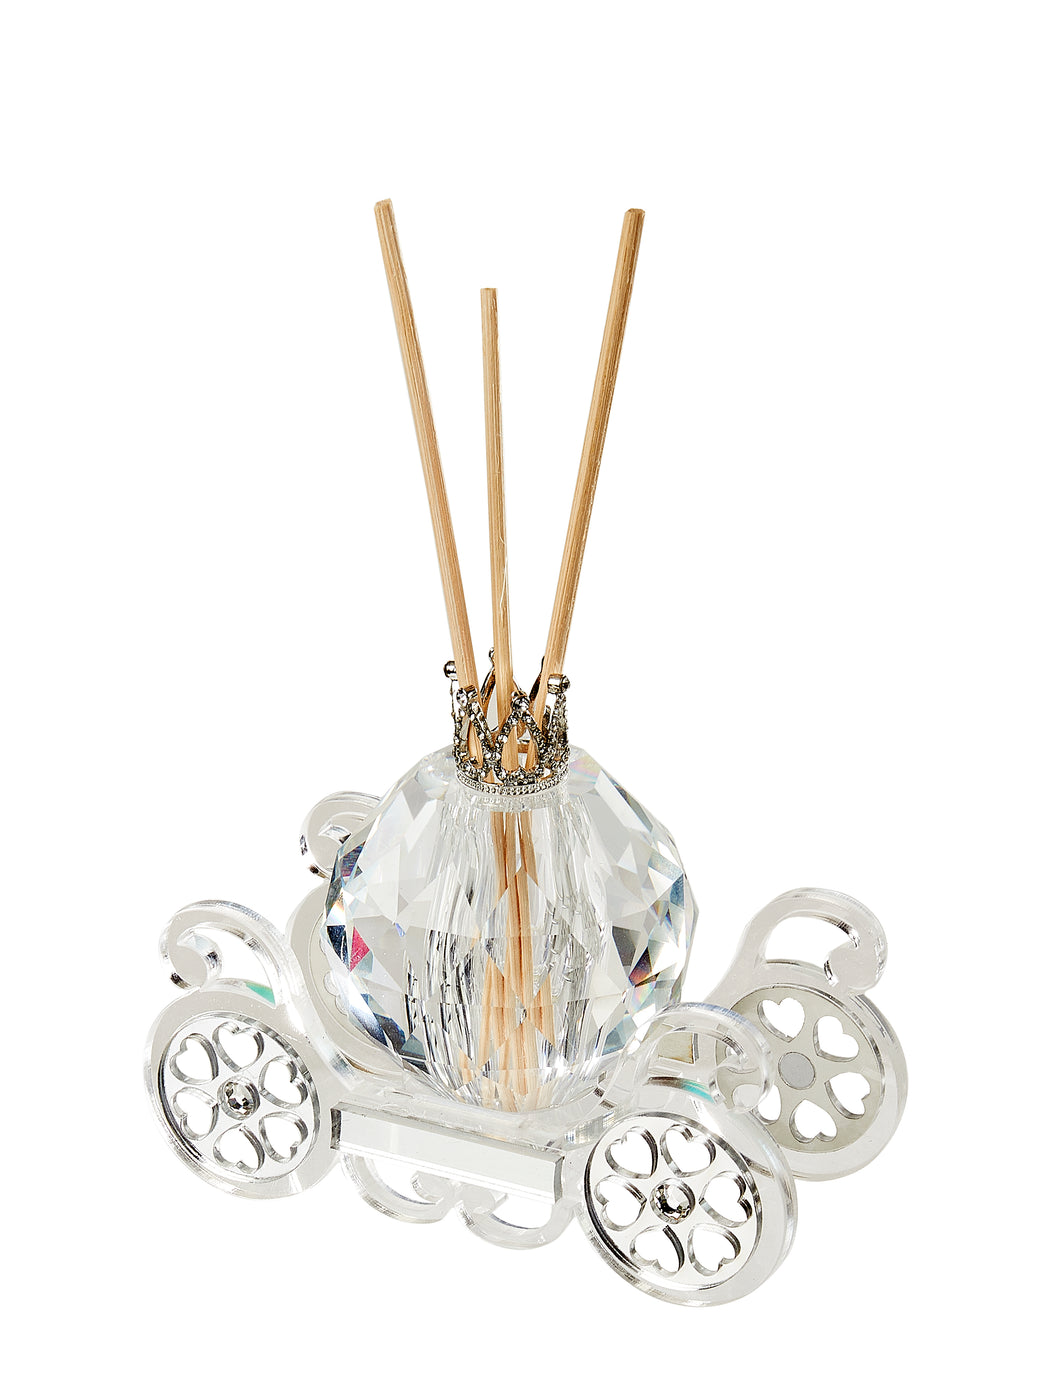 Debora Carlucci Aromatherapy Crystal Carriage Diffuser W. Scent  #DC23021-ARG